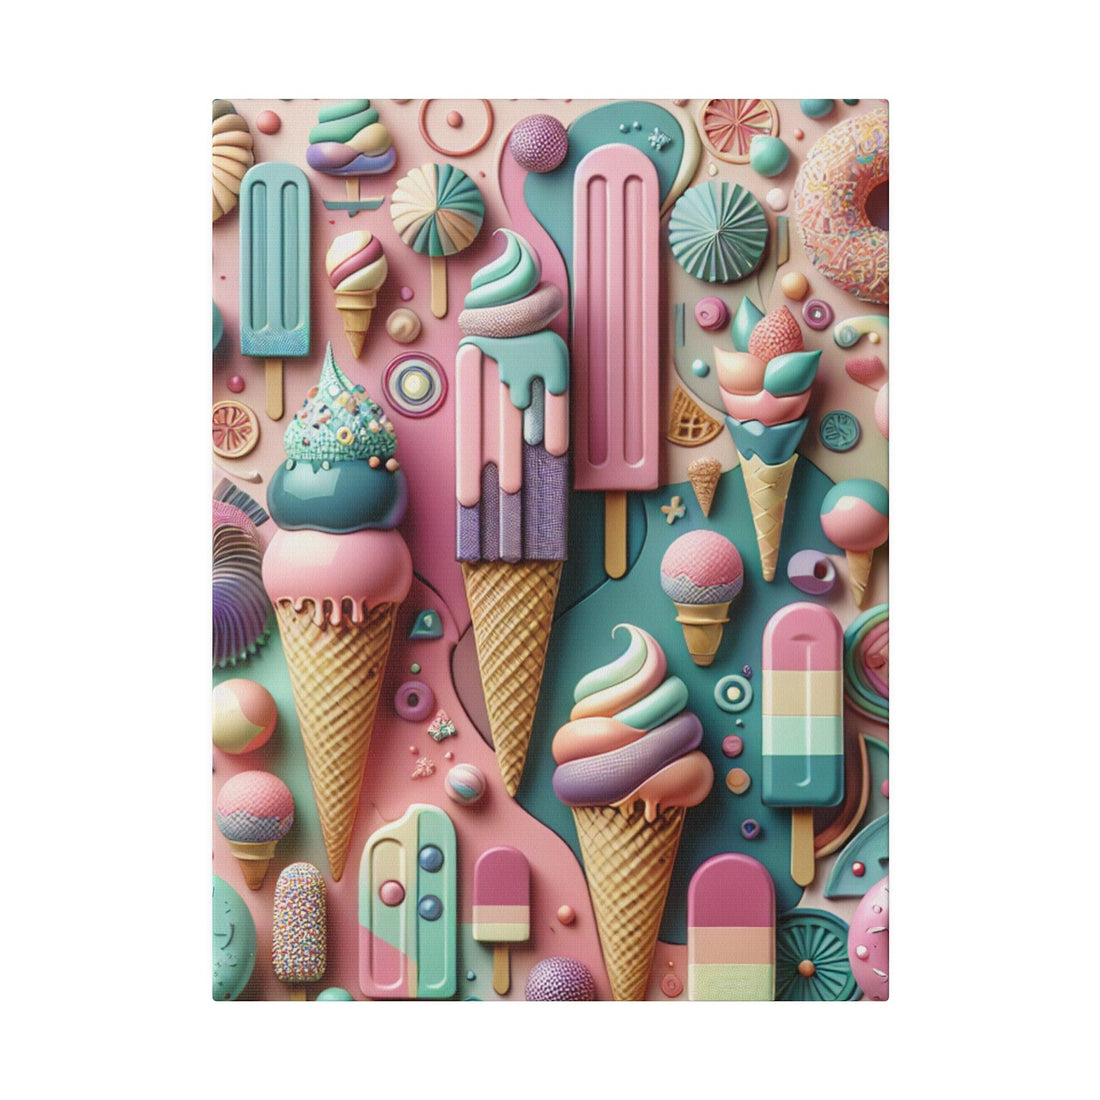 "Scoops of Serenity: Ice Cream Inspired Canvas Wall Art" - The Alice Gallery